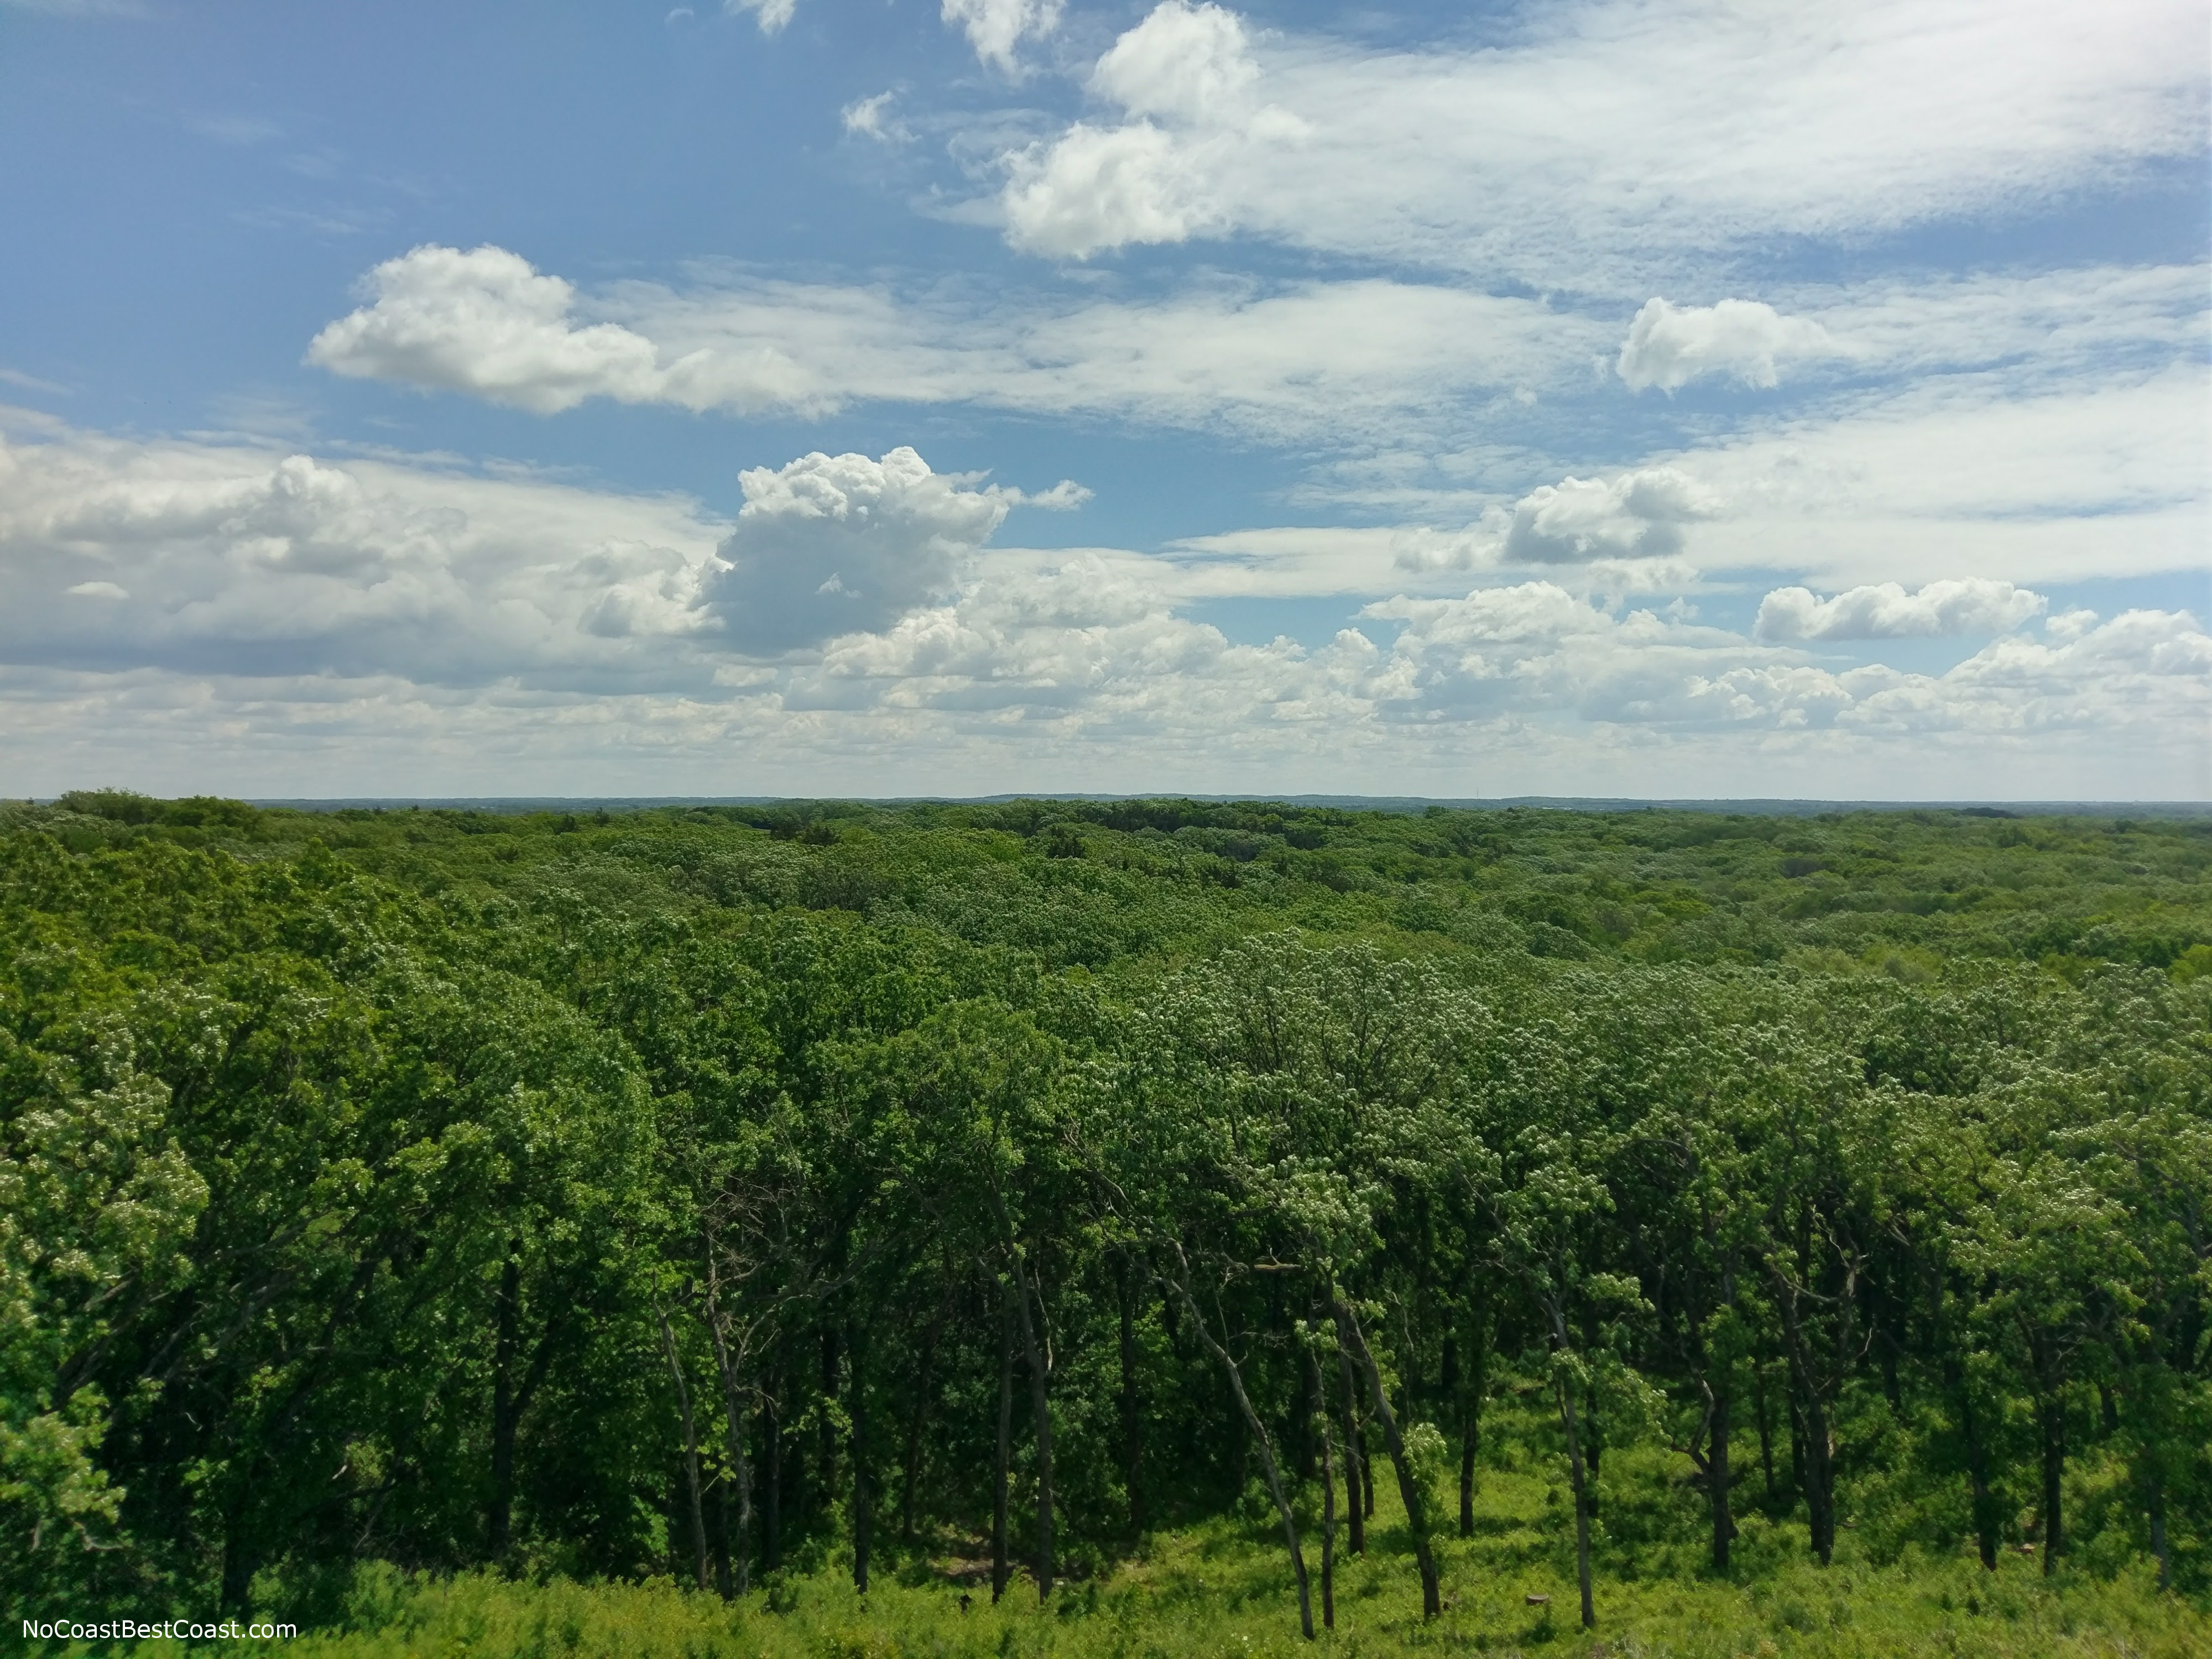 One view from atop the Mount Tom observation tower.